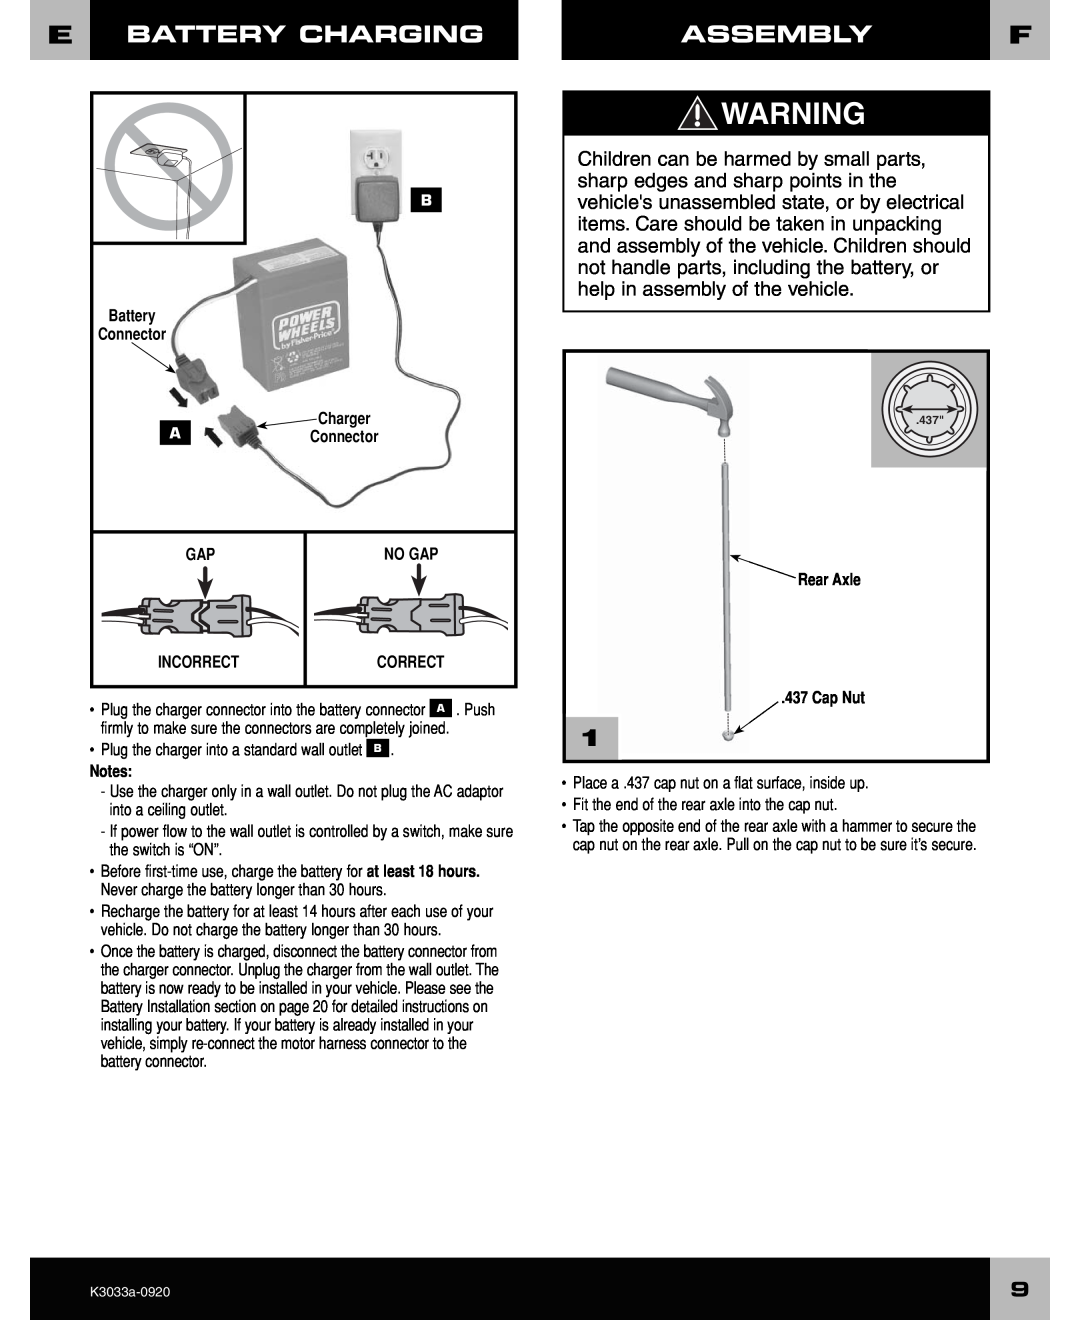 Ford F-150 owner manual Assembly, Battery Charging, Rear Axle 437 Cap Nut, No Gap, Incorrect, Correct, K3033a-0920 